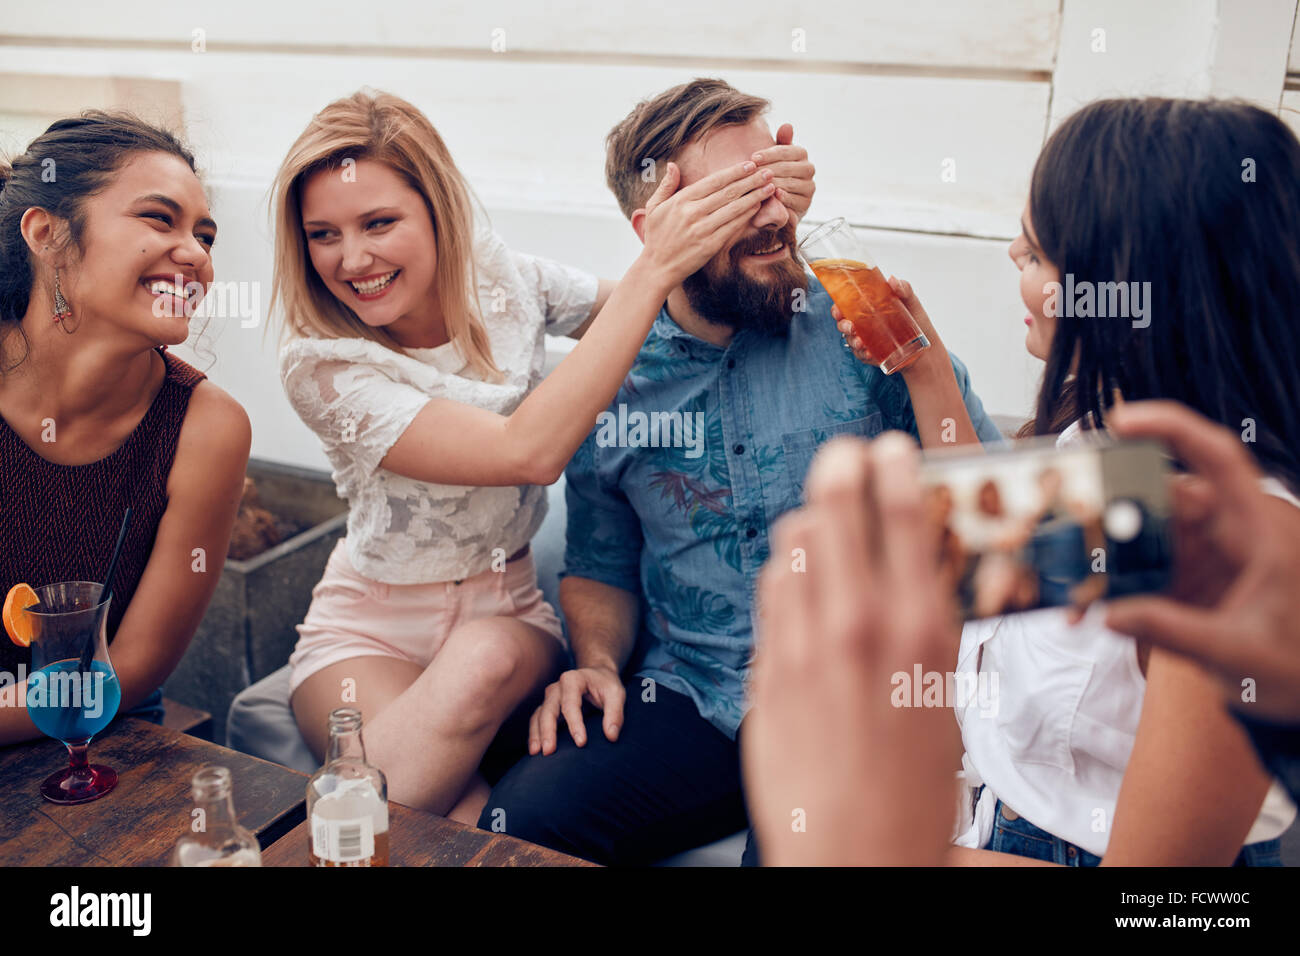 Young people sitting together enjoying party. Woman closing eyes of a man with another giving drink. Young friends having fun at Stock Photo